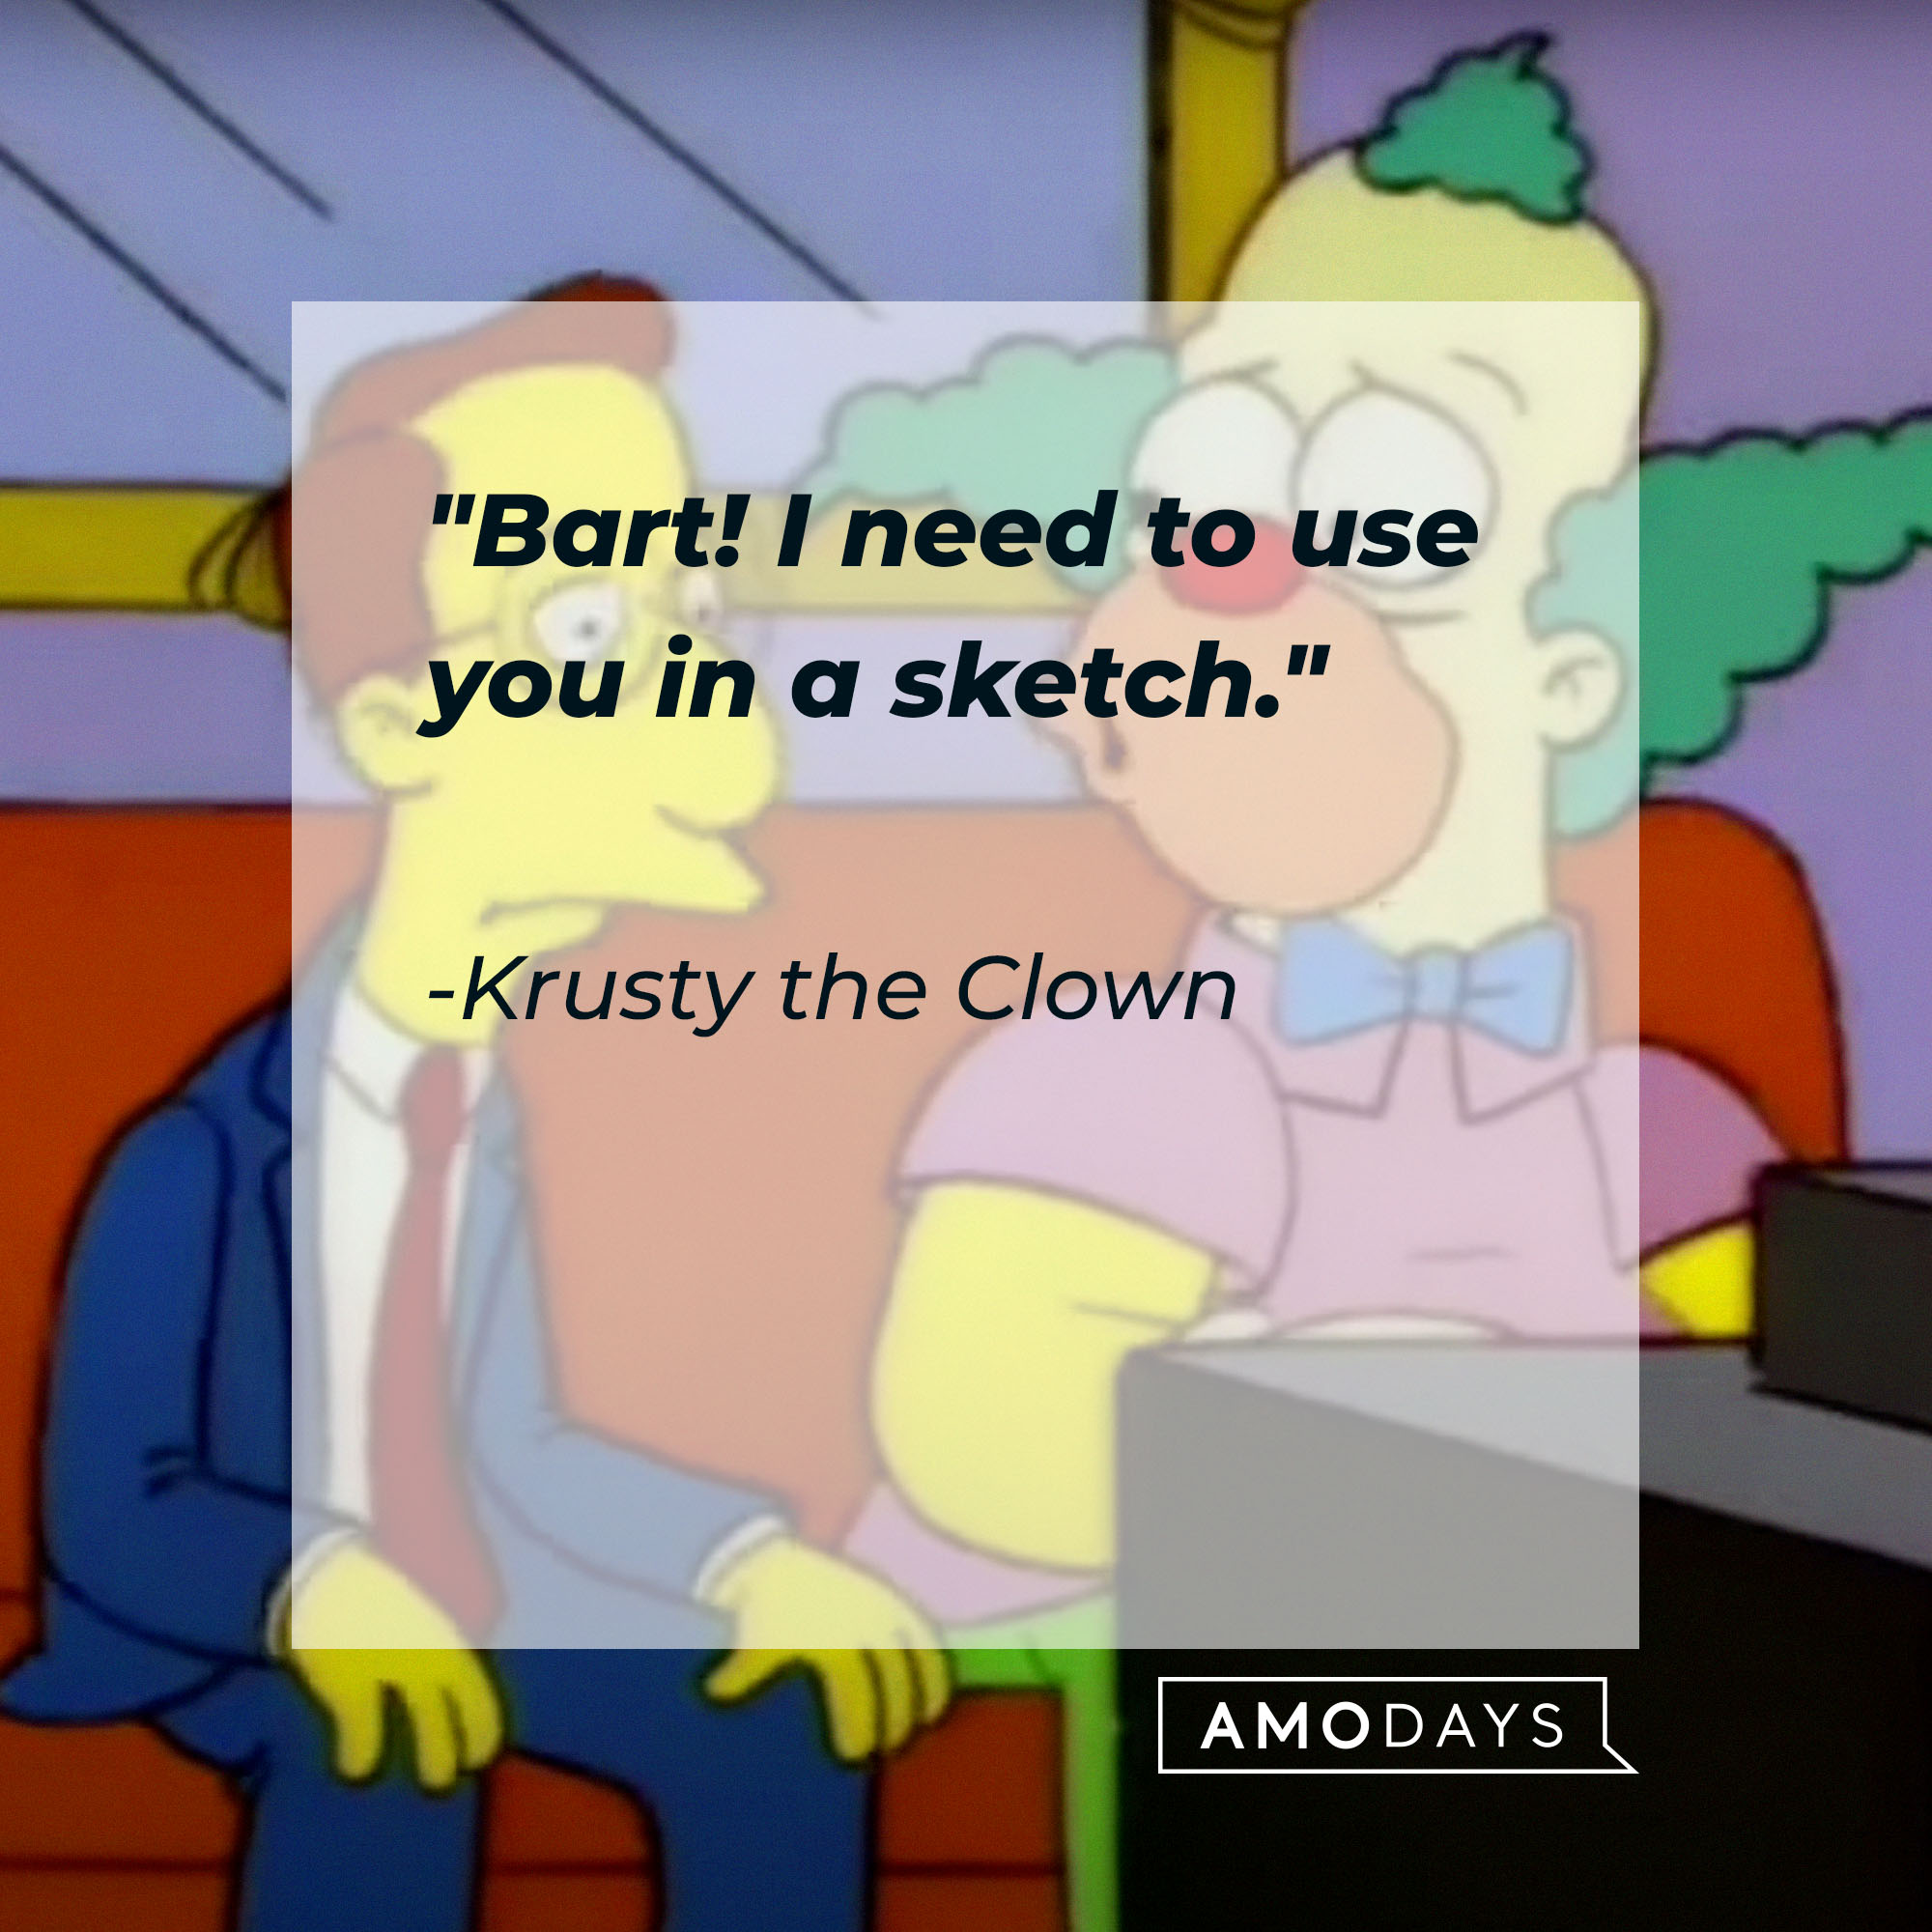 Krusty the Clown's quote: "Bart! I need to use you in a sketch" | Source: Facebook.com/TheSimpsons